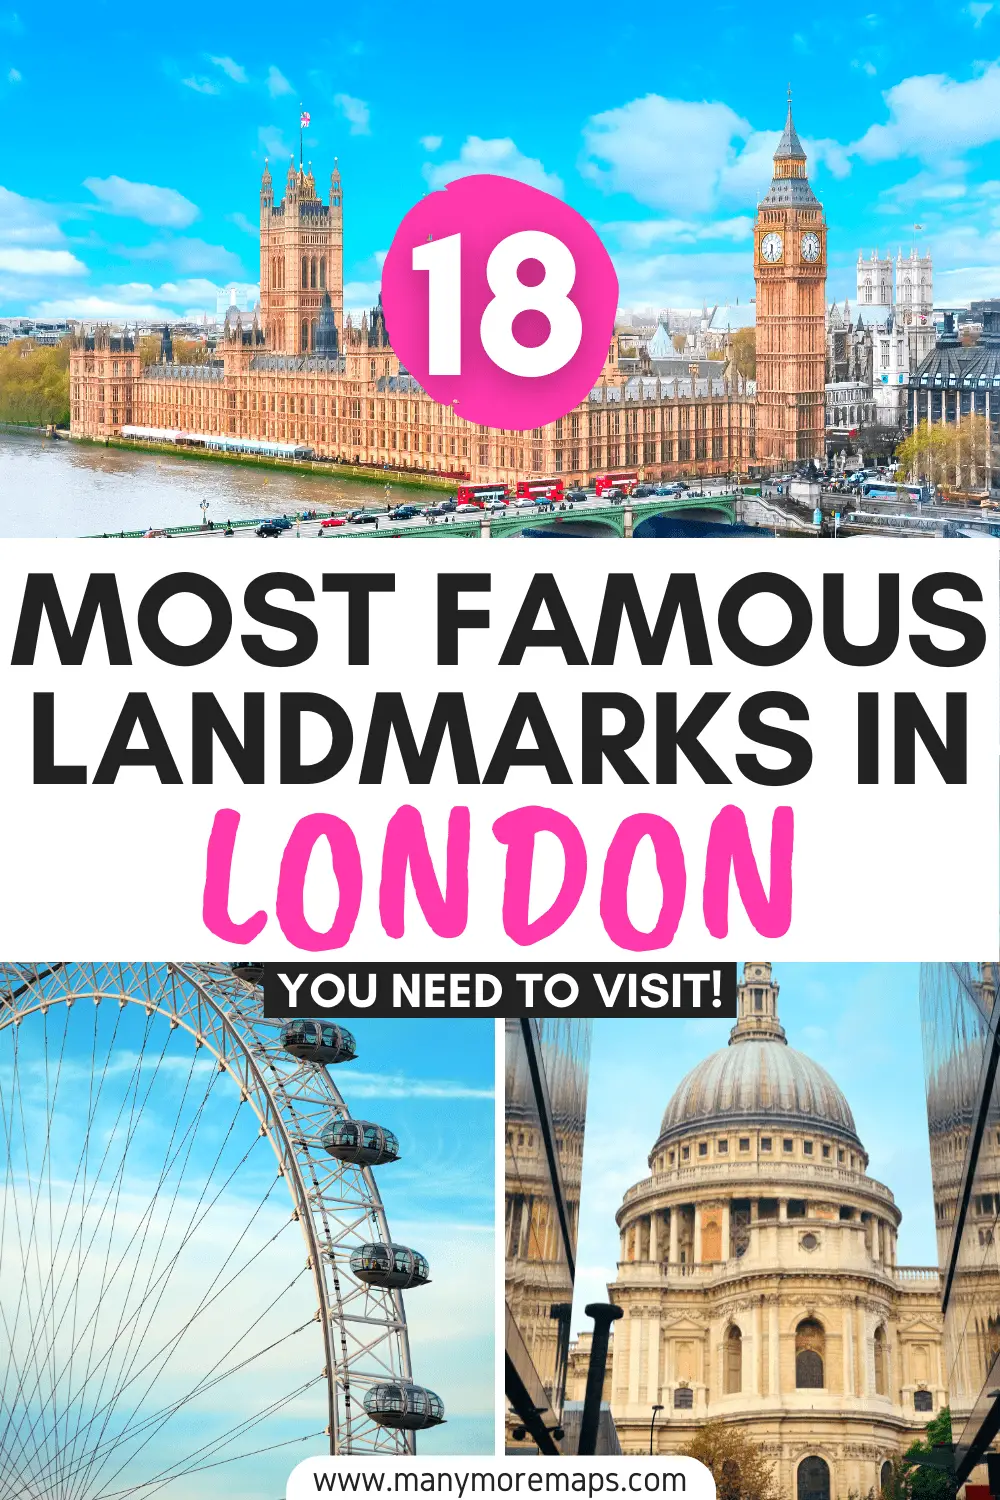 If you want to know the best places to visit in London look no further! Here are the most famous landmarks in London to add to your itinerary